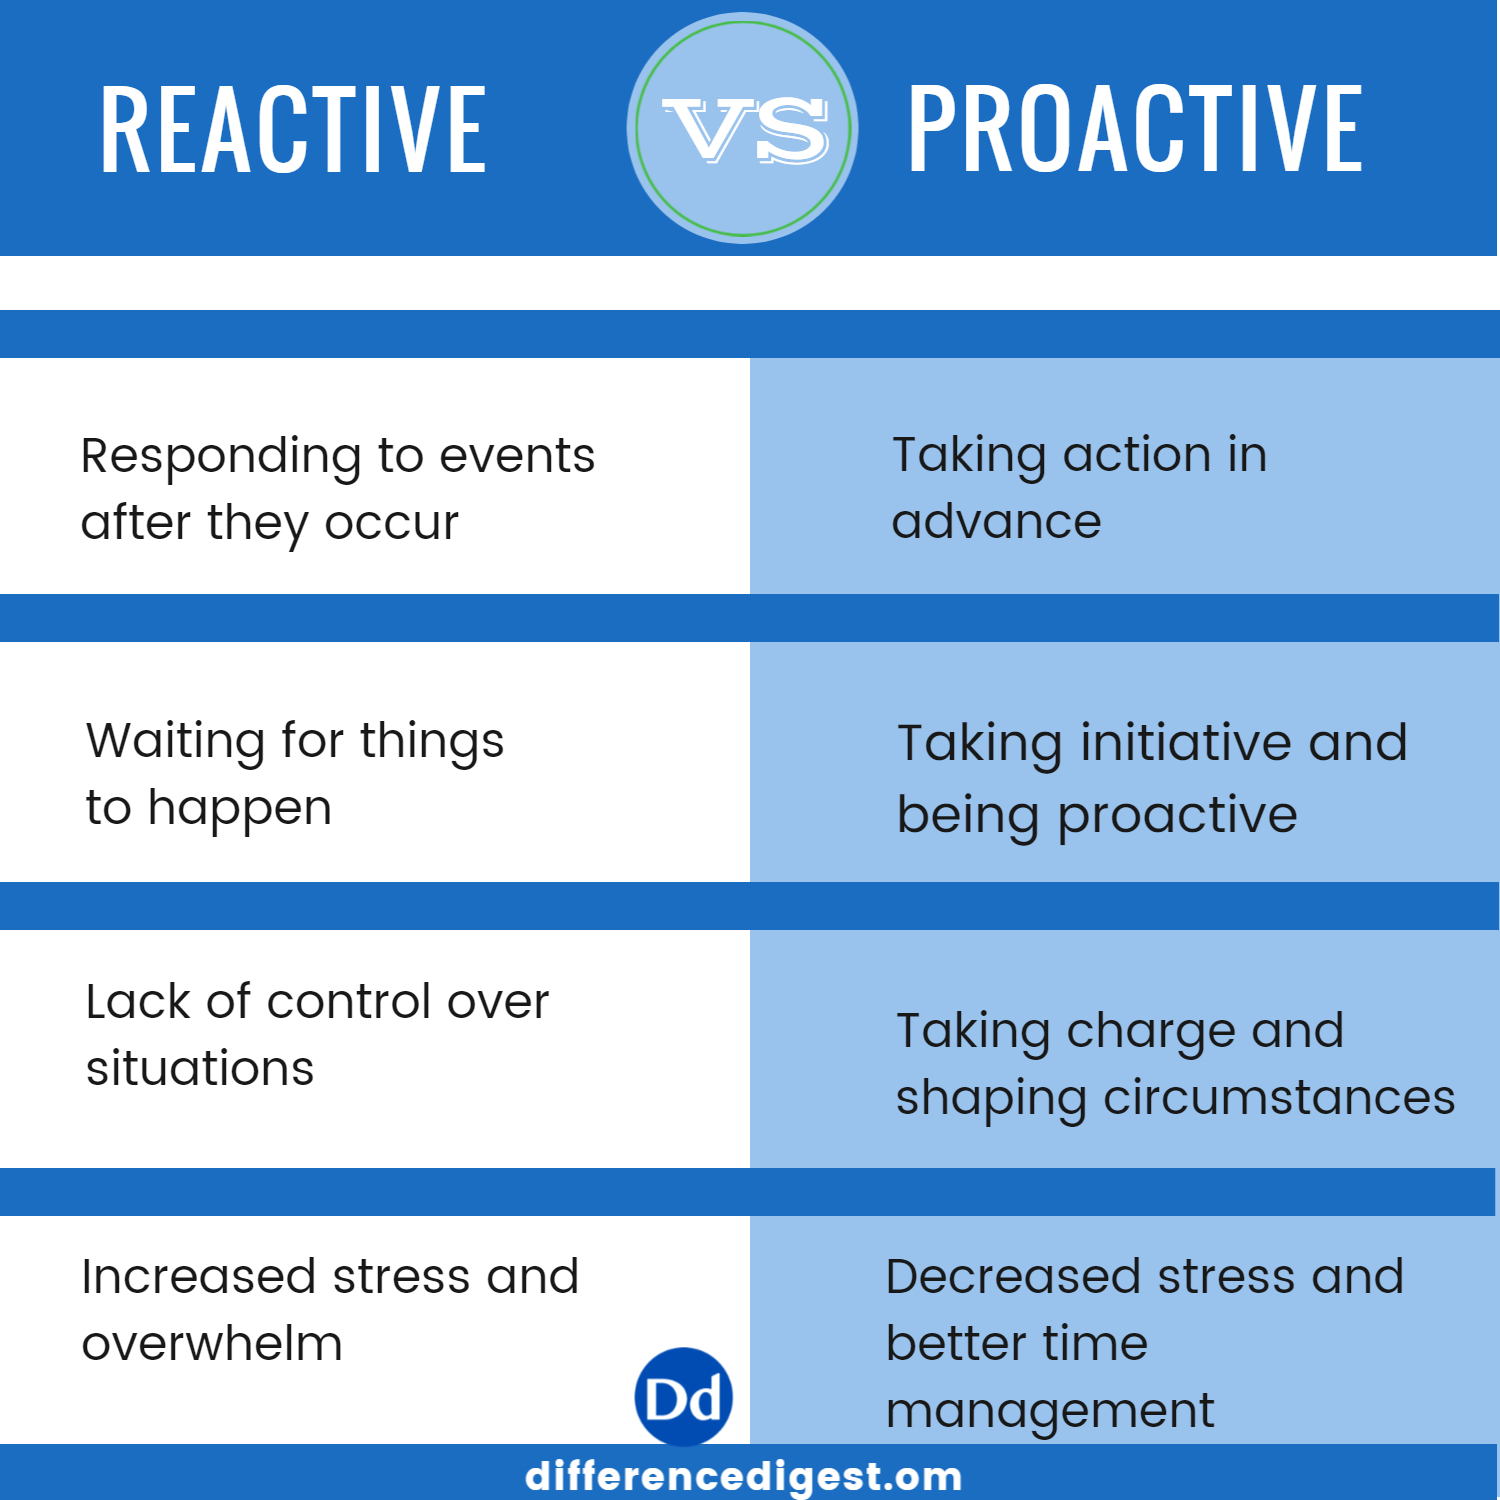 picture of reactive vs proactive key differences